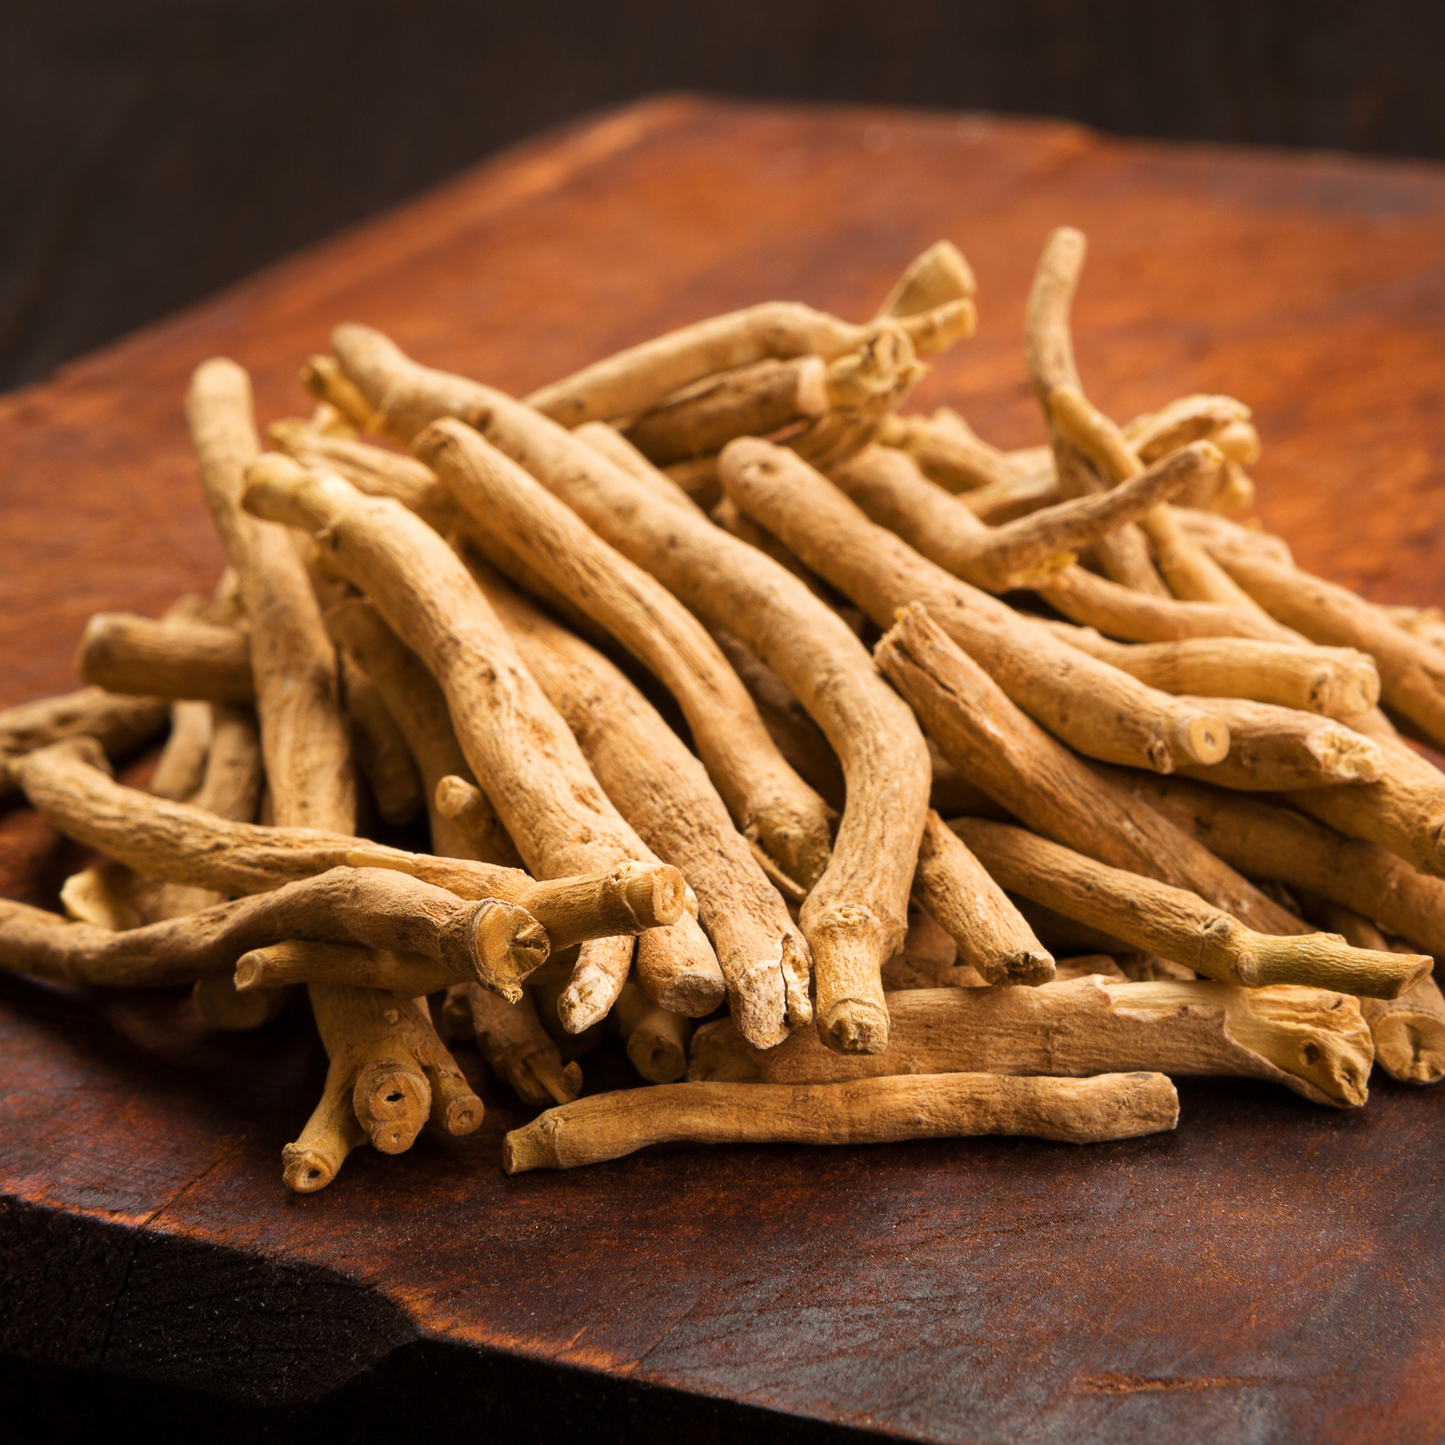 Ashwagandha Root For Your Inner Powerhouse